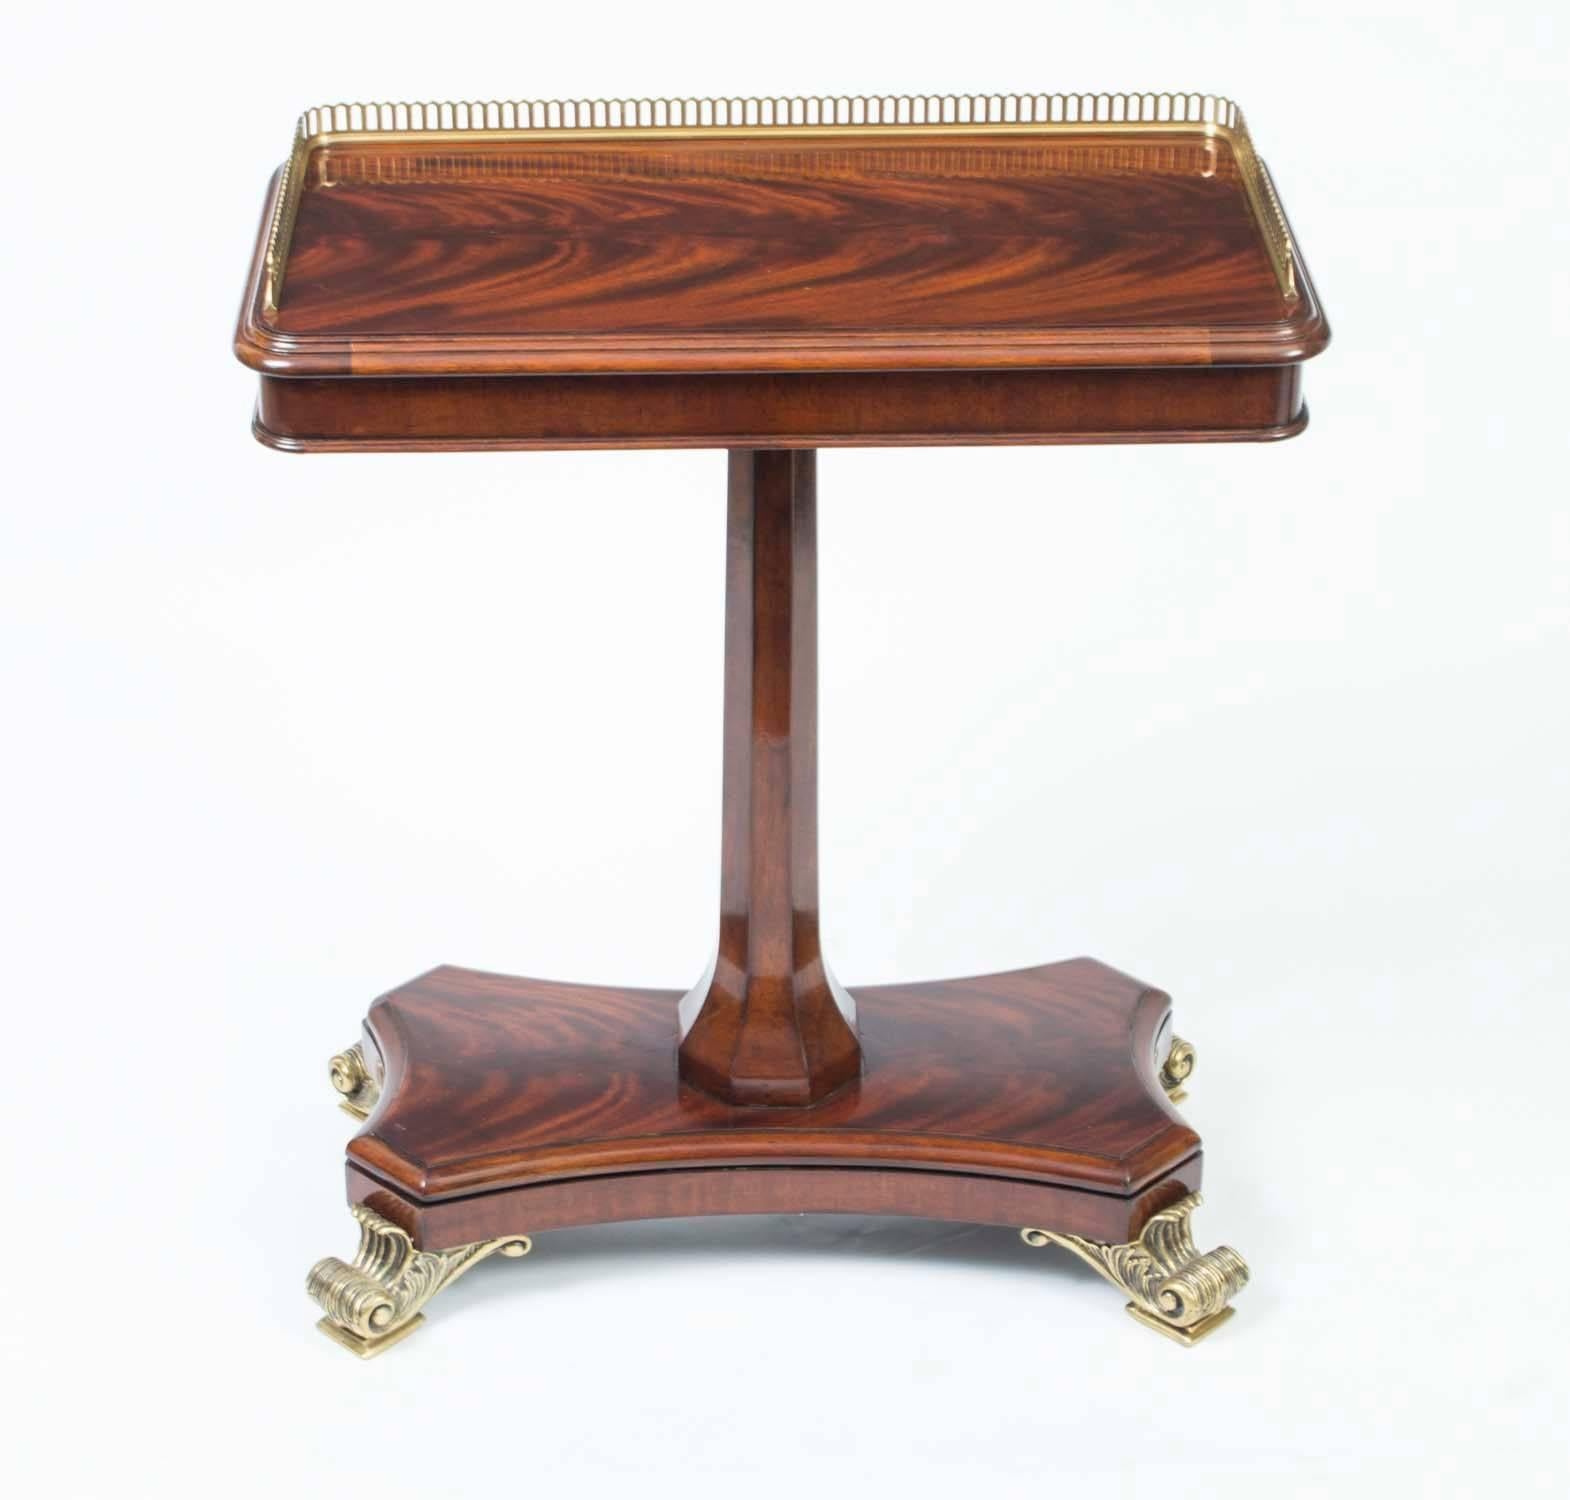 This is a handsome Regency style occasional table from the last quarter of the 20th century.

It has been masterfully created by Italian craftsmen in flame mahogany with a brass gallery and gorgeous ormolu feet.

Perfect at the end of a sofa as a